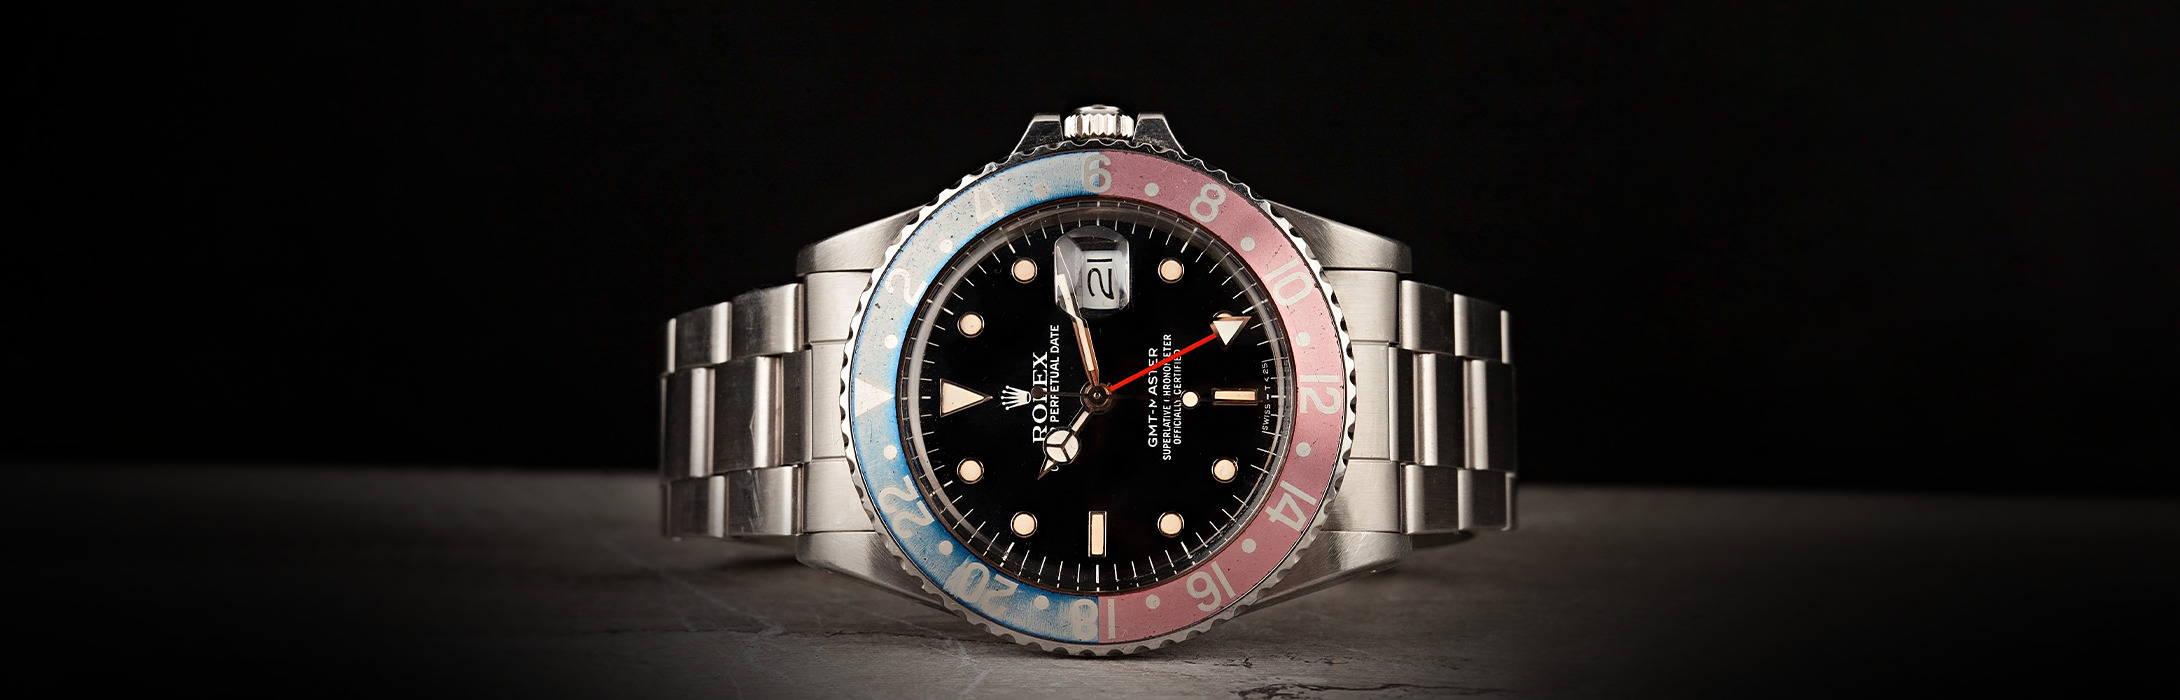 Rolex 16750 GMT-Master Ultimate Buying Guide